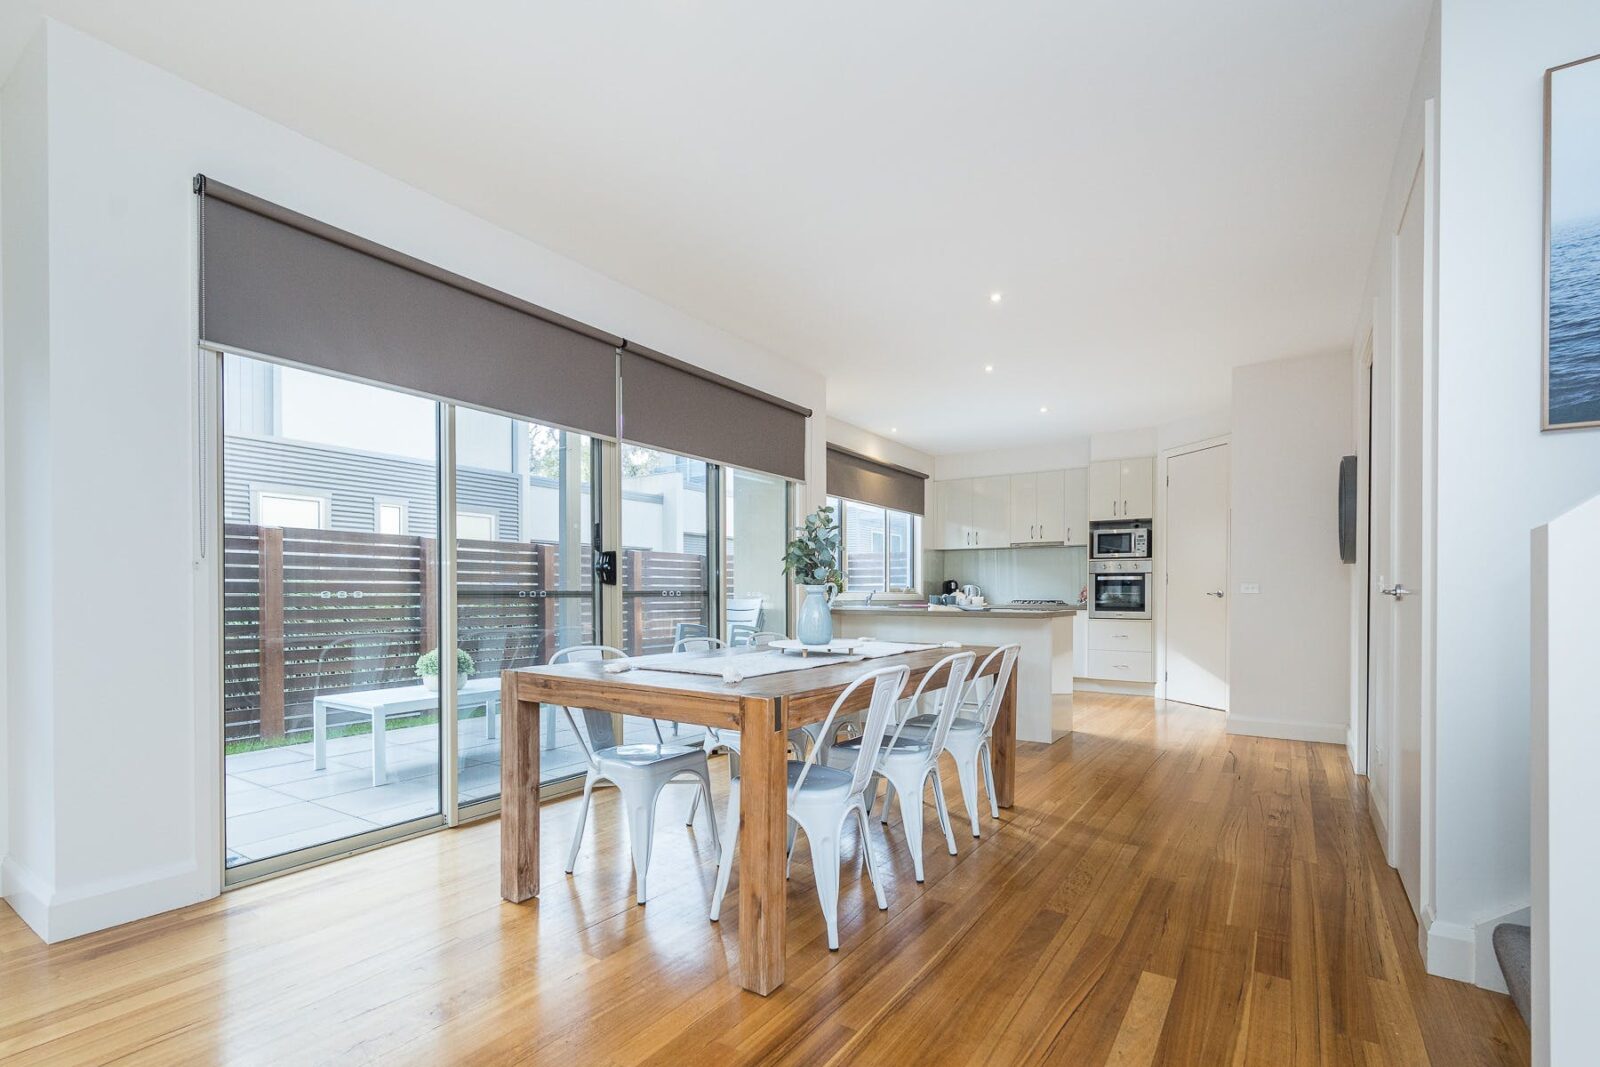 Light-filled kichen and dining area with timber floors, sliding doors leading to patio area